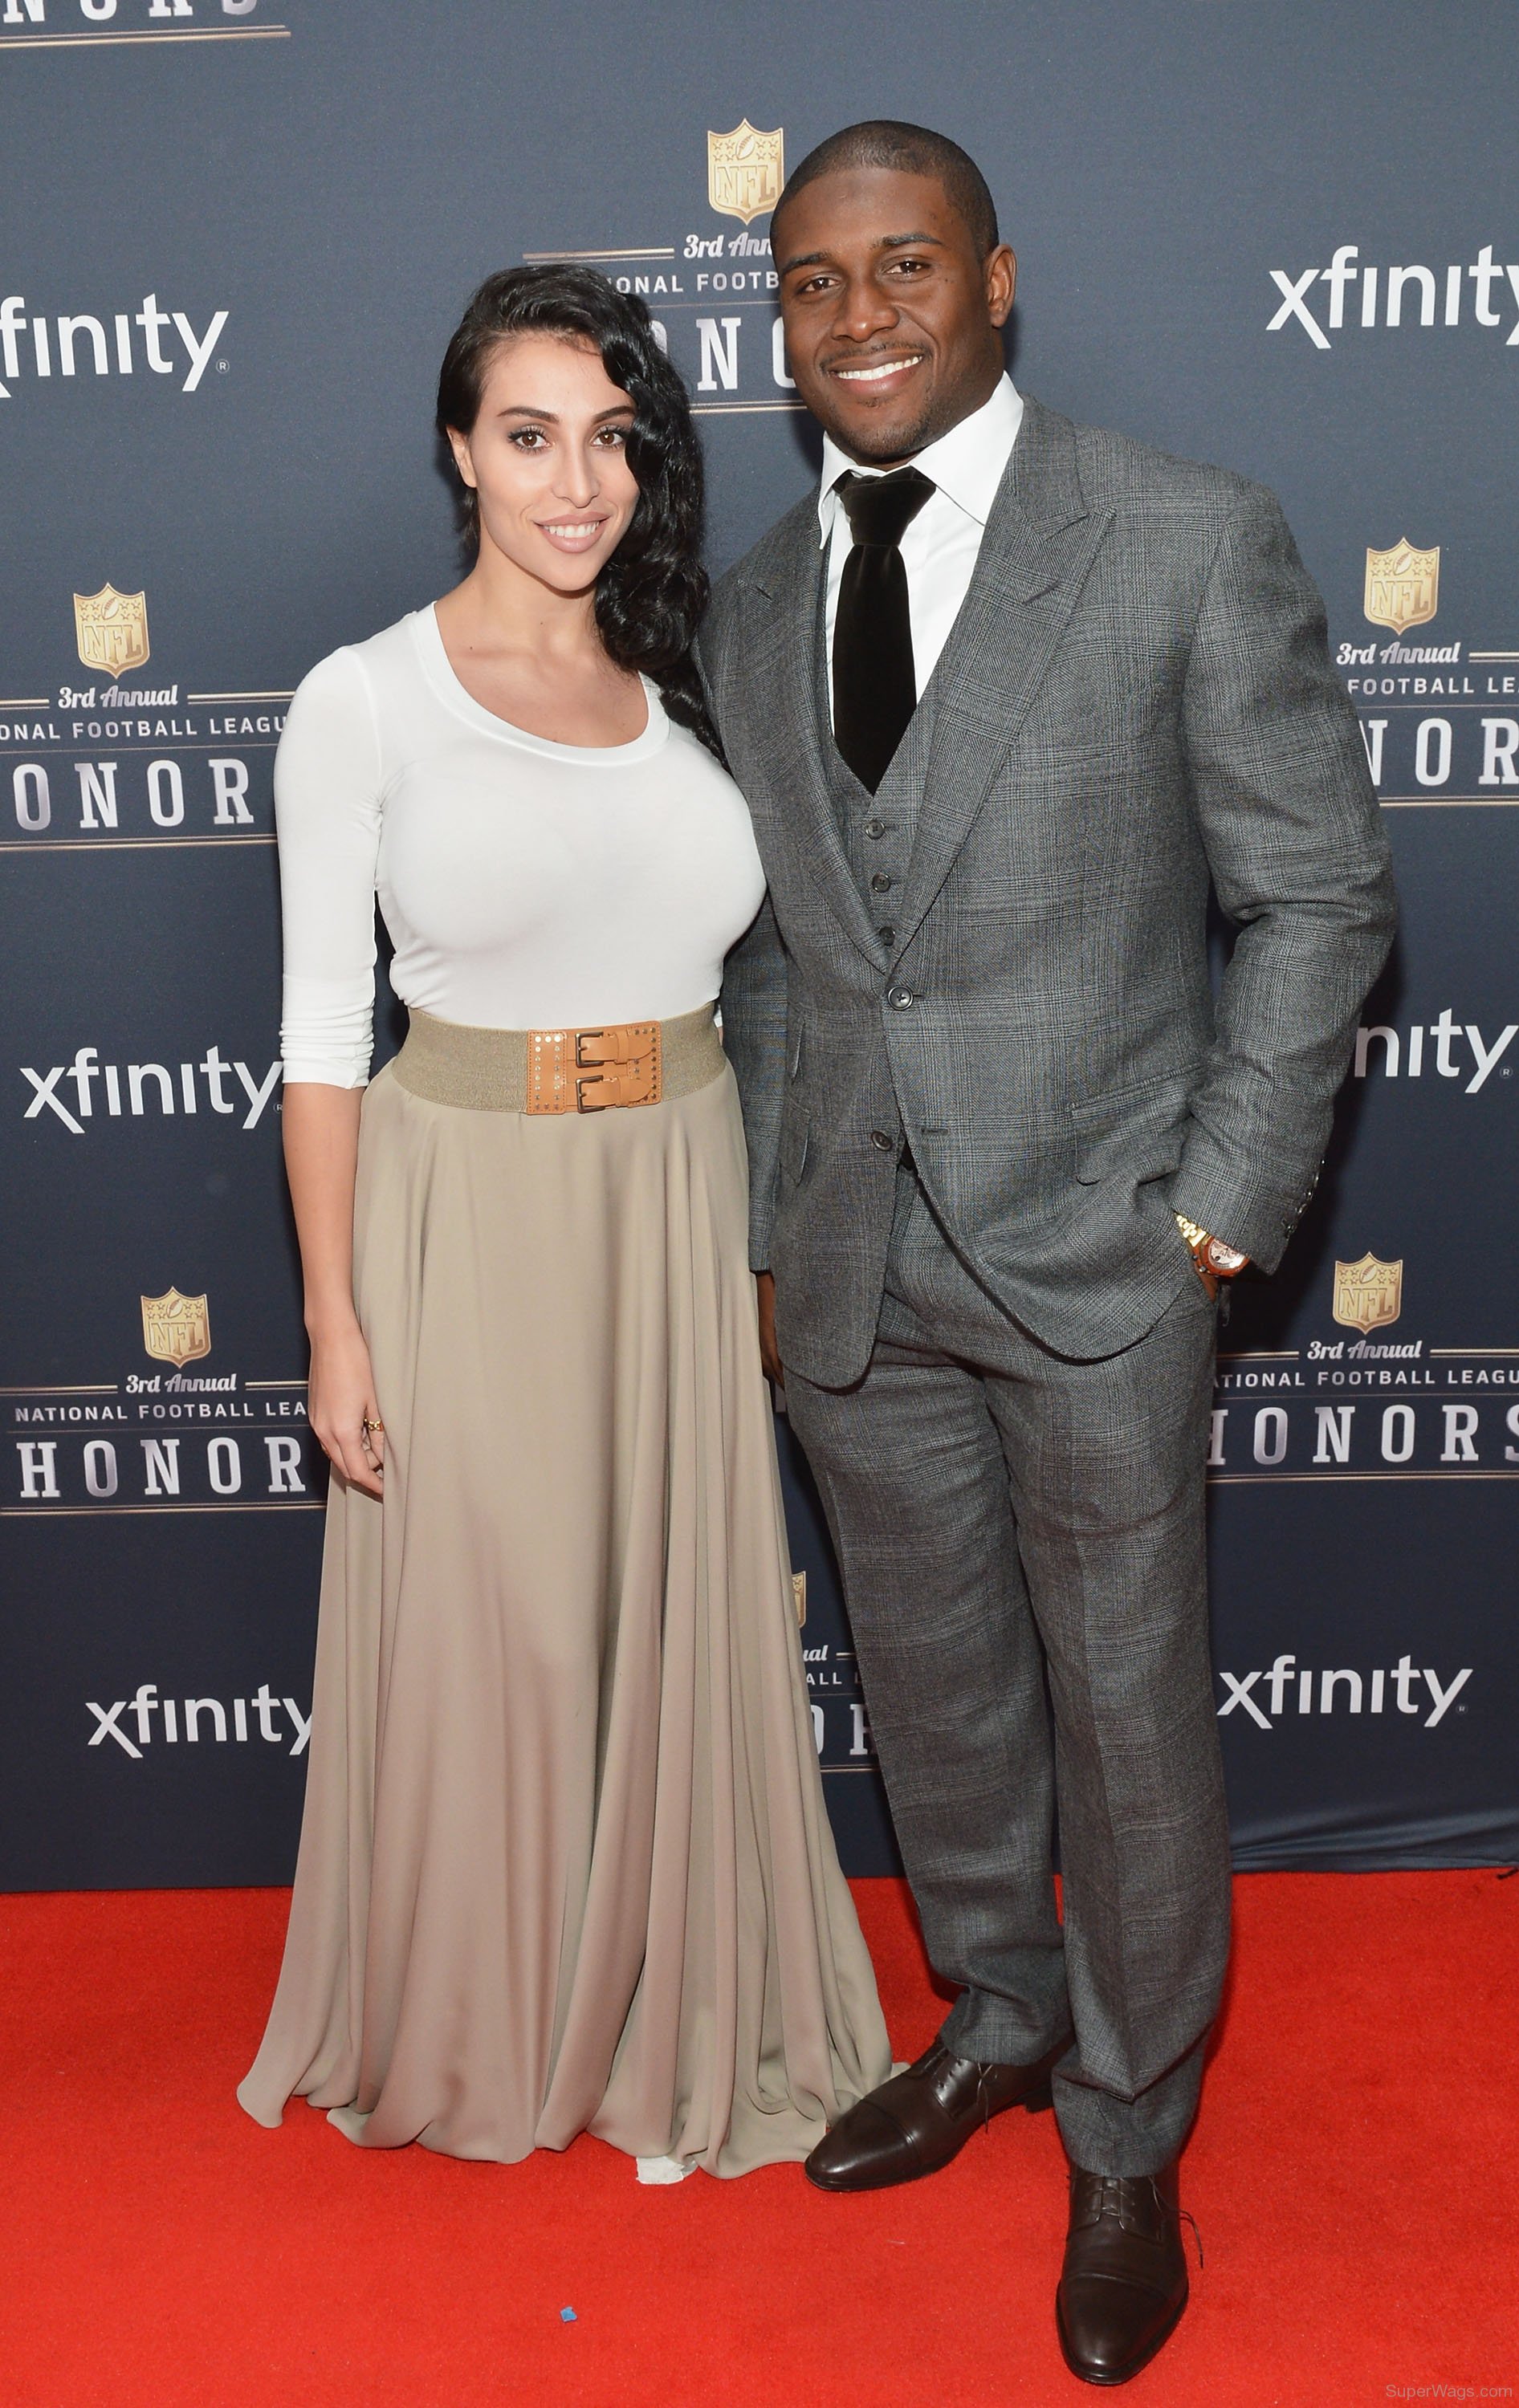 Reggie Bush Wife Lilit Avagyan Super Wags Hottest Wives And Girlfriends Of High Profile